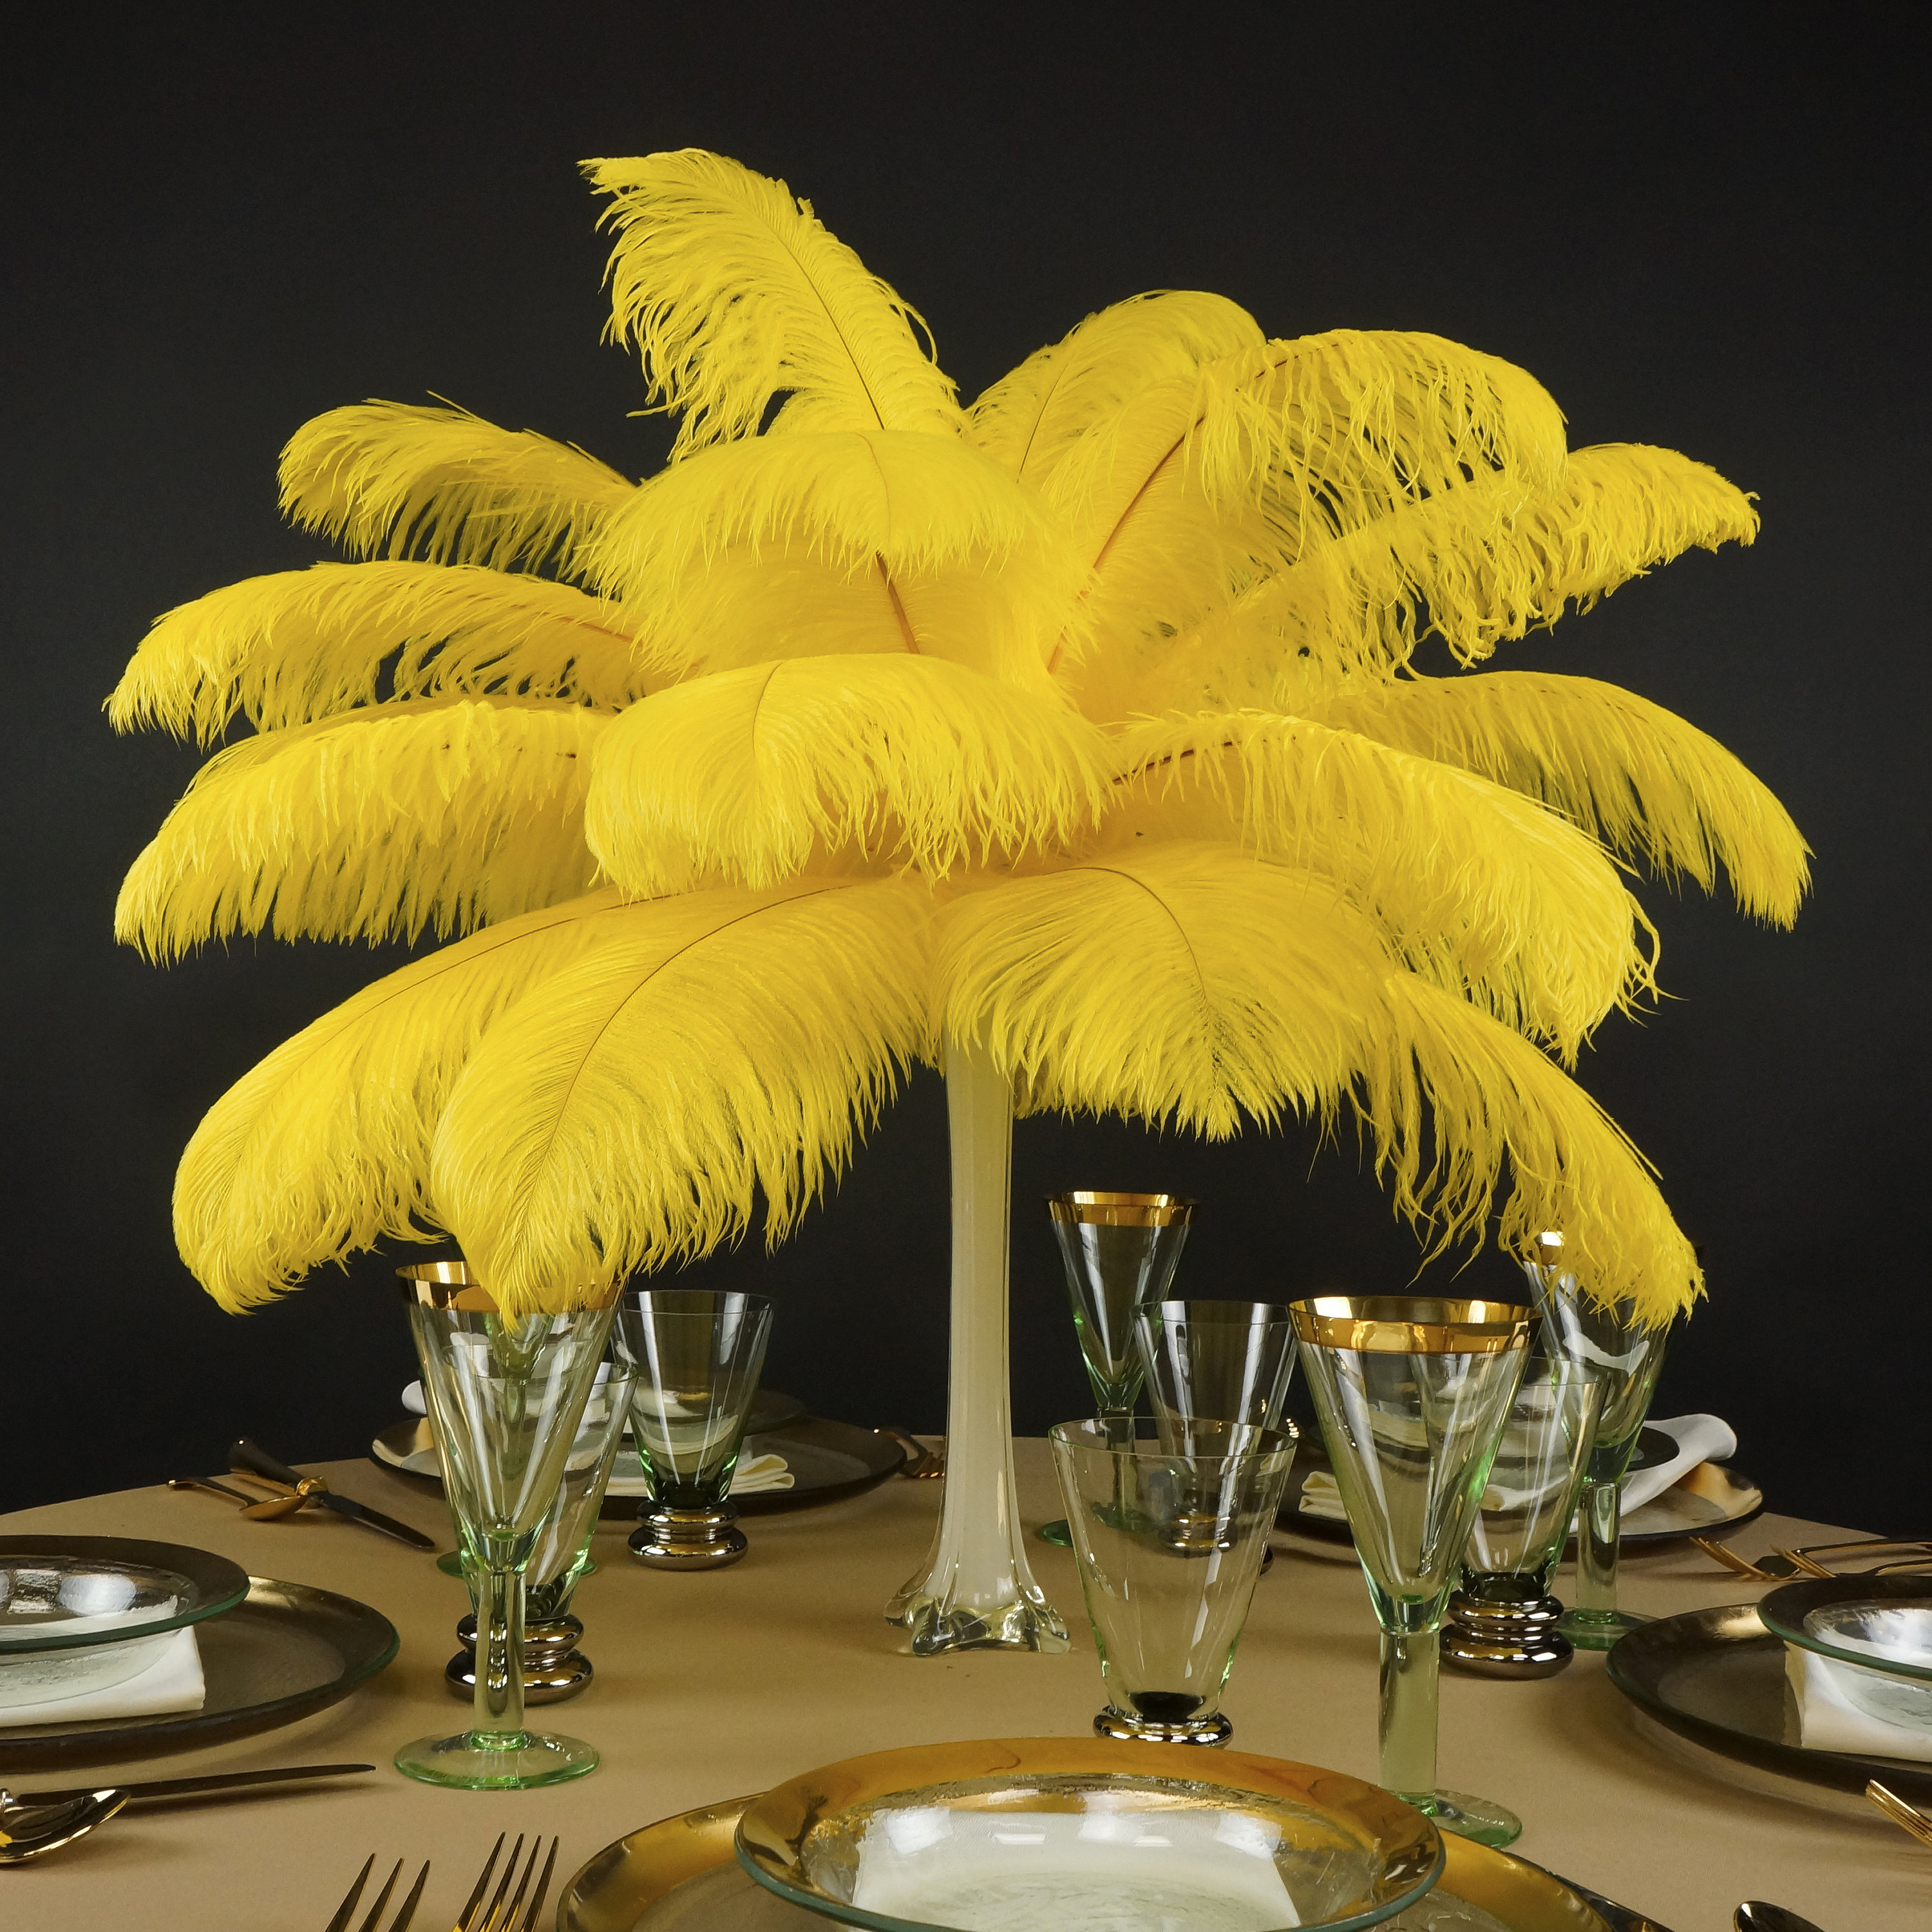 14-16inch Natural Ostrich Feathers Plume for Wedding Centerpieces Party Decoration WIBEN Set of 10 Yellow 